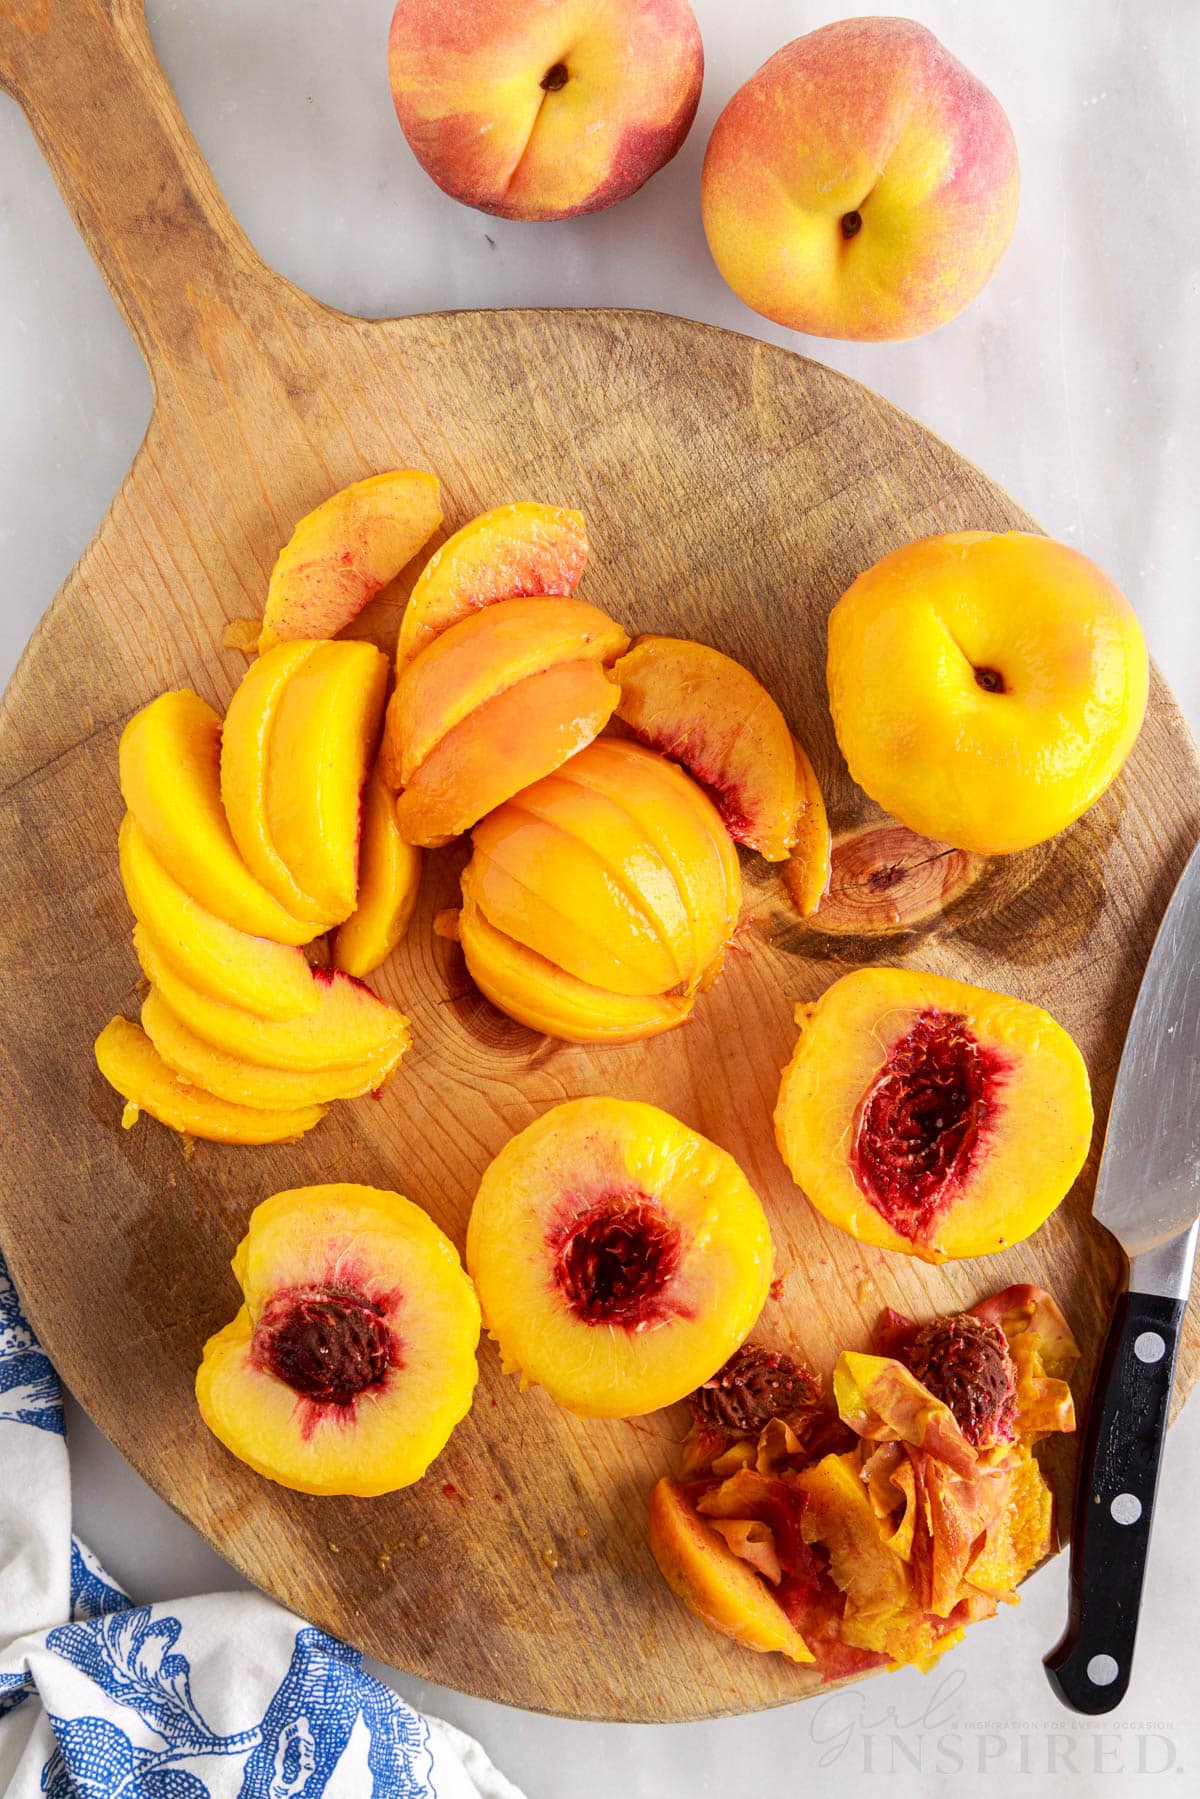 A round wooden cutting board with sliced peaches and halved peaches with a knife on the cutting board.